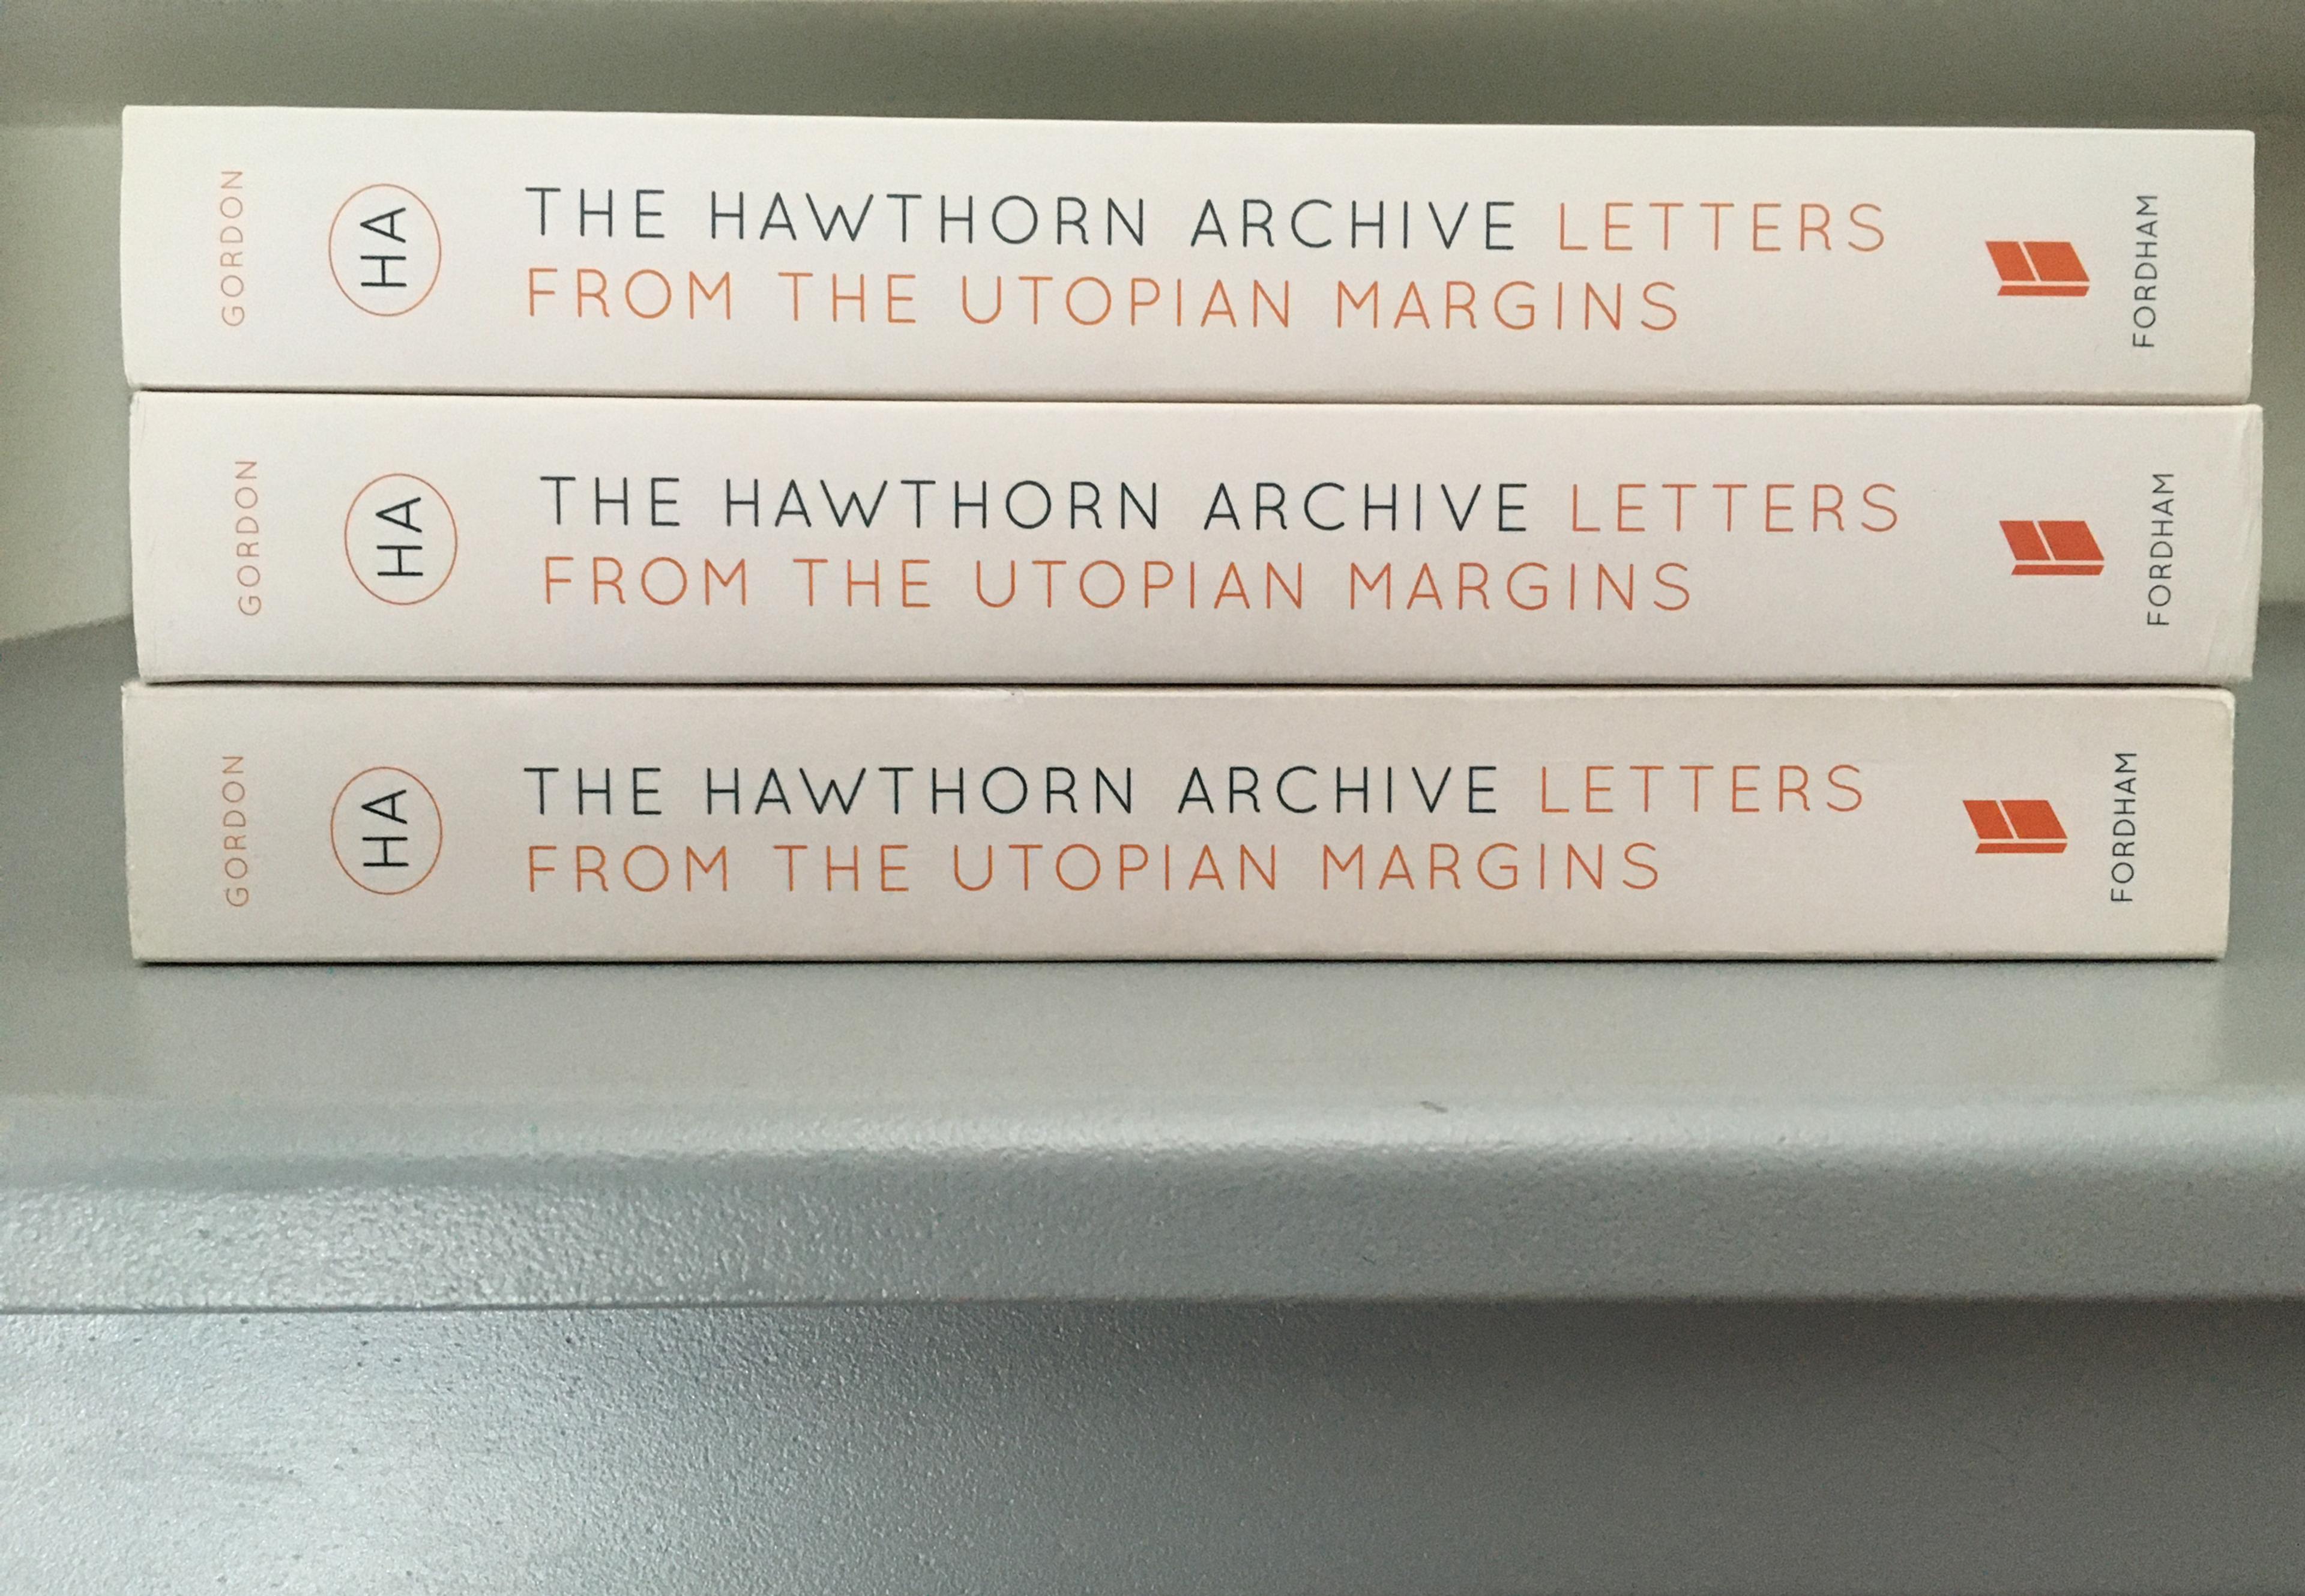 The Hawthorn Archive: Letters from the Utopian Margins